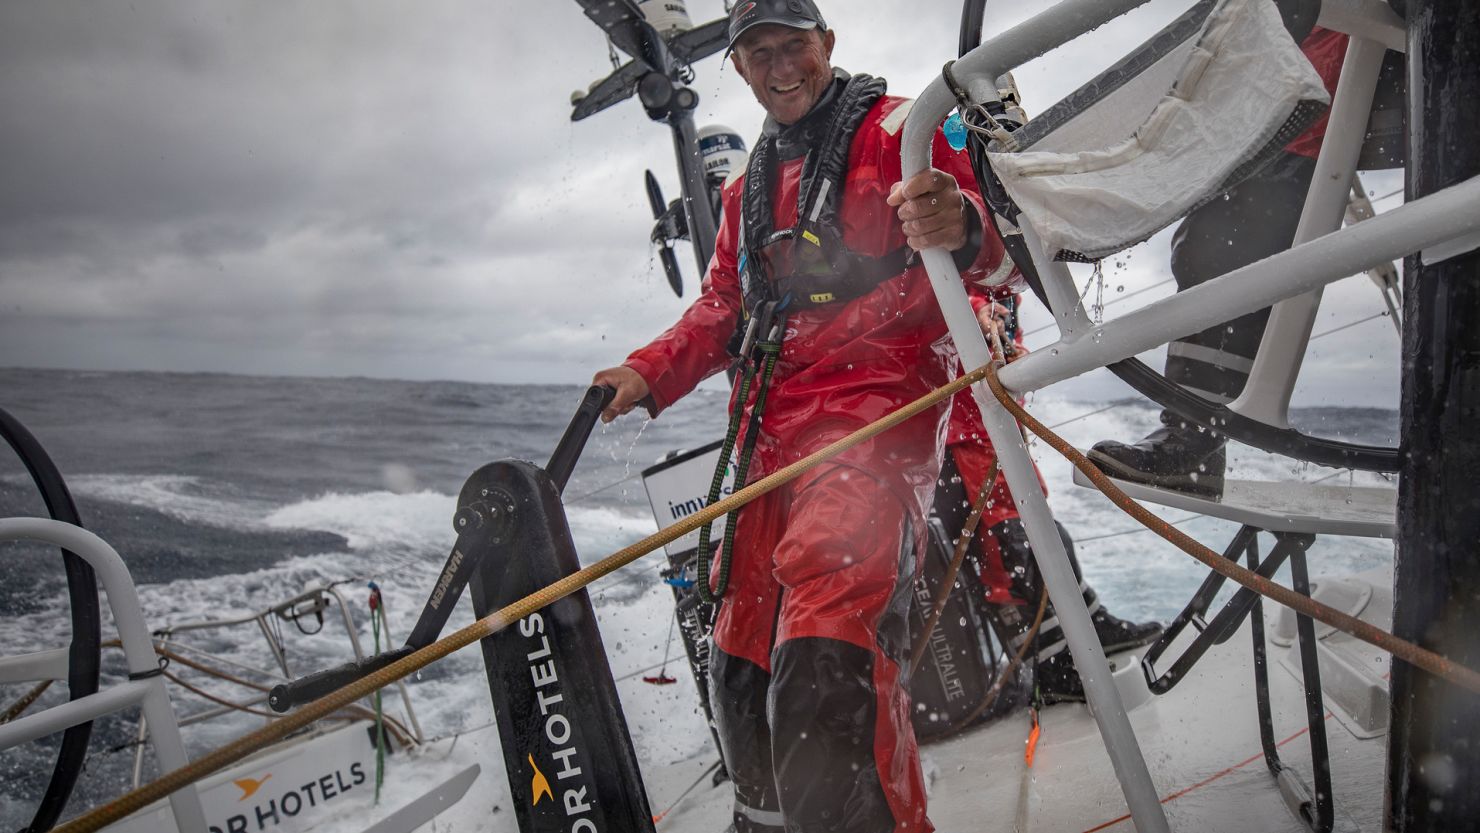 John Fisher was washed overboard and is presumed lost at sea during the Volvo Ocean Race.